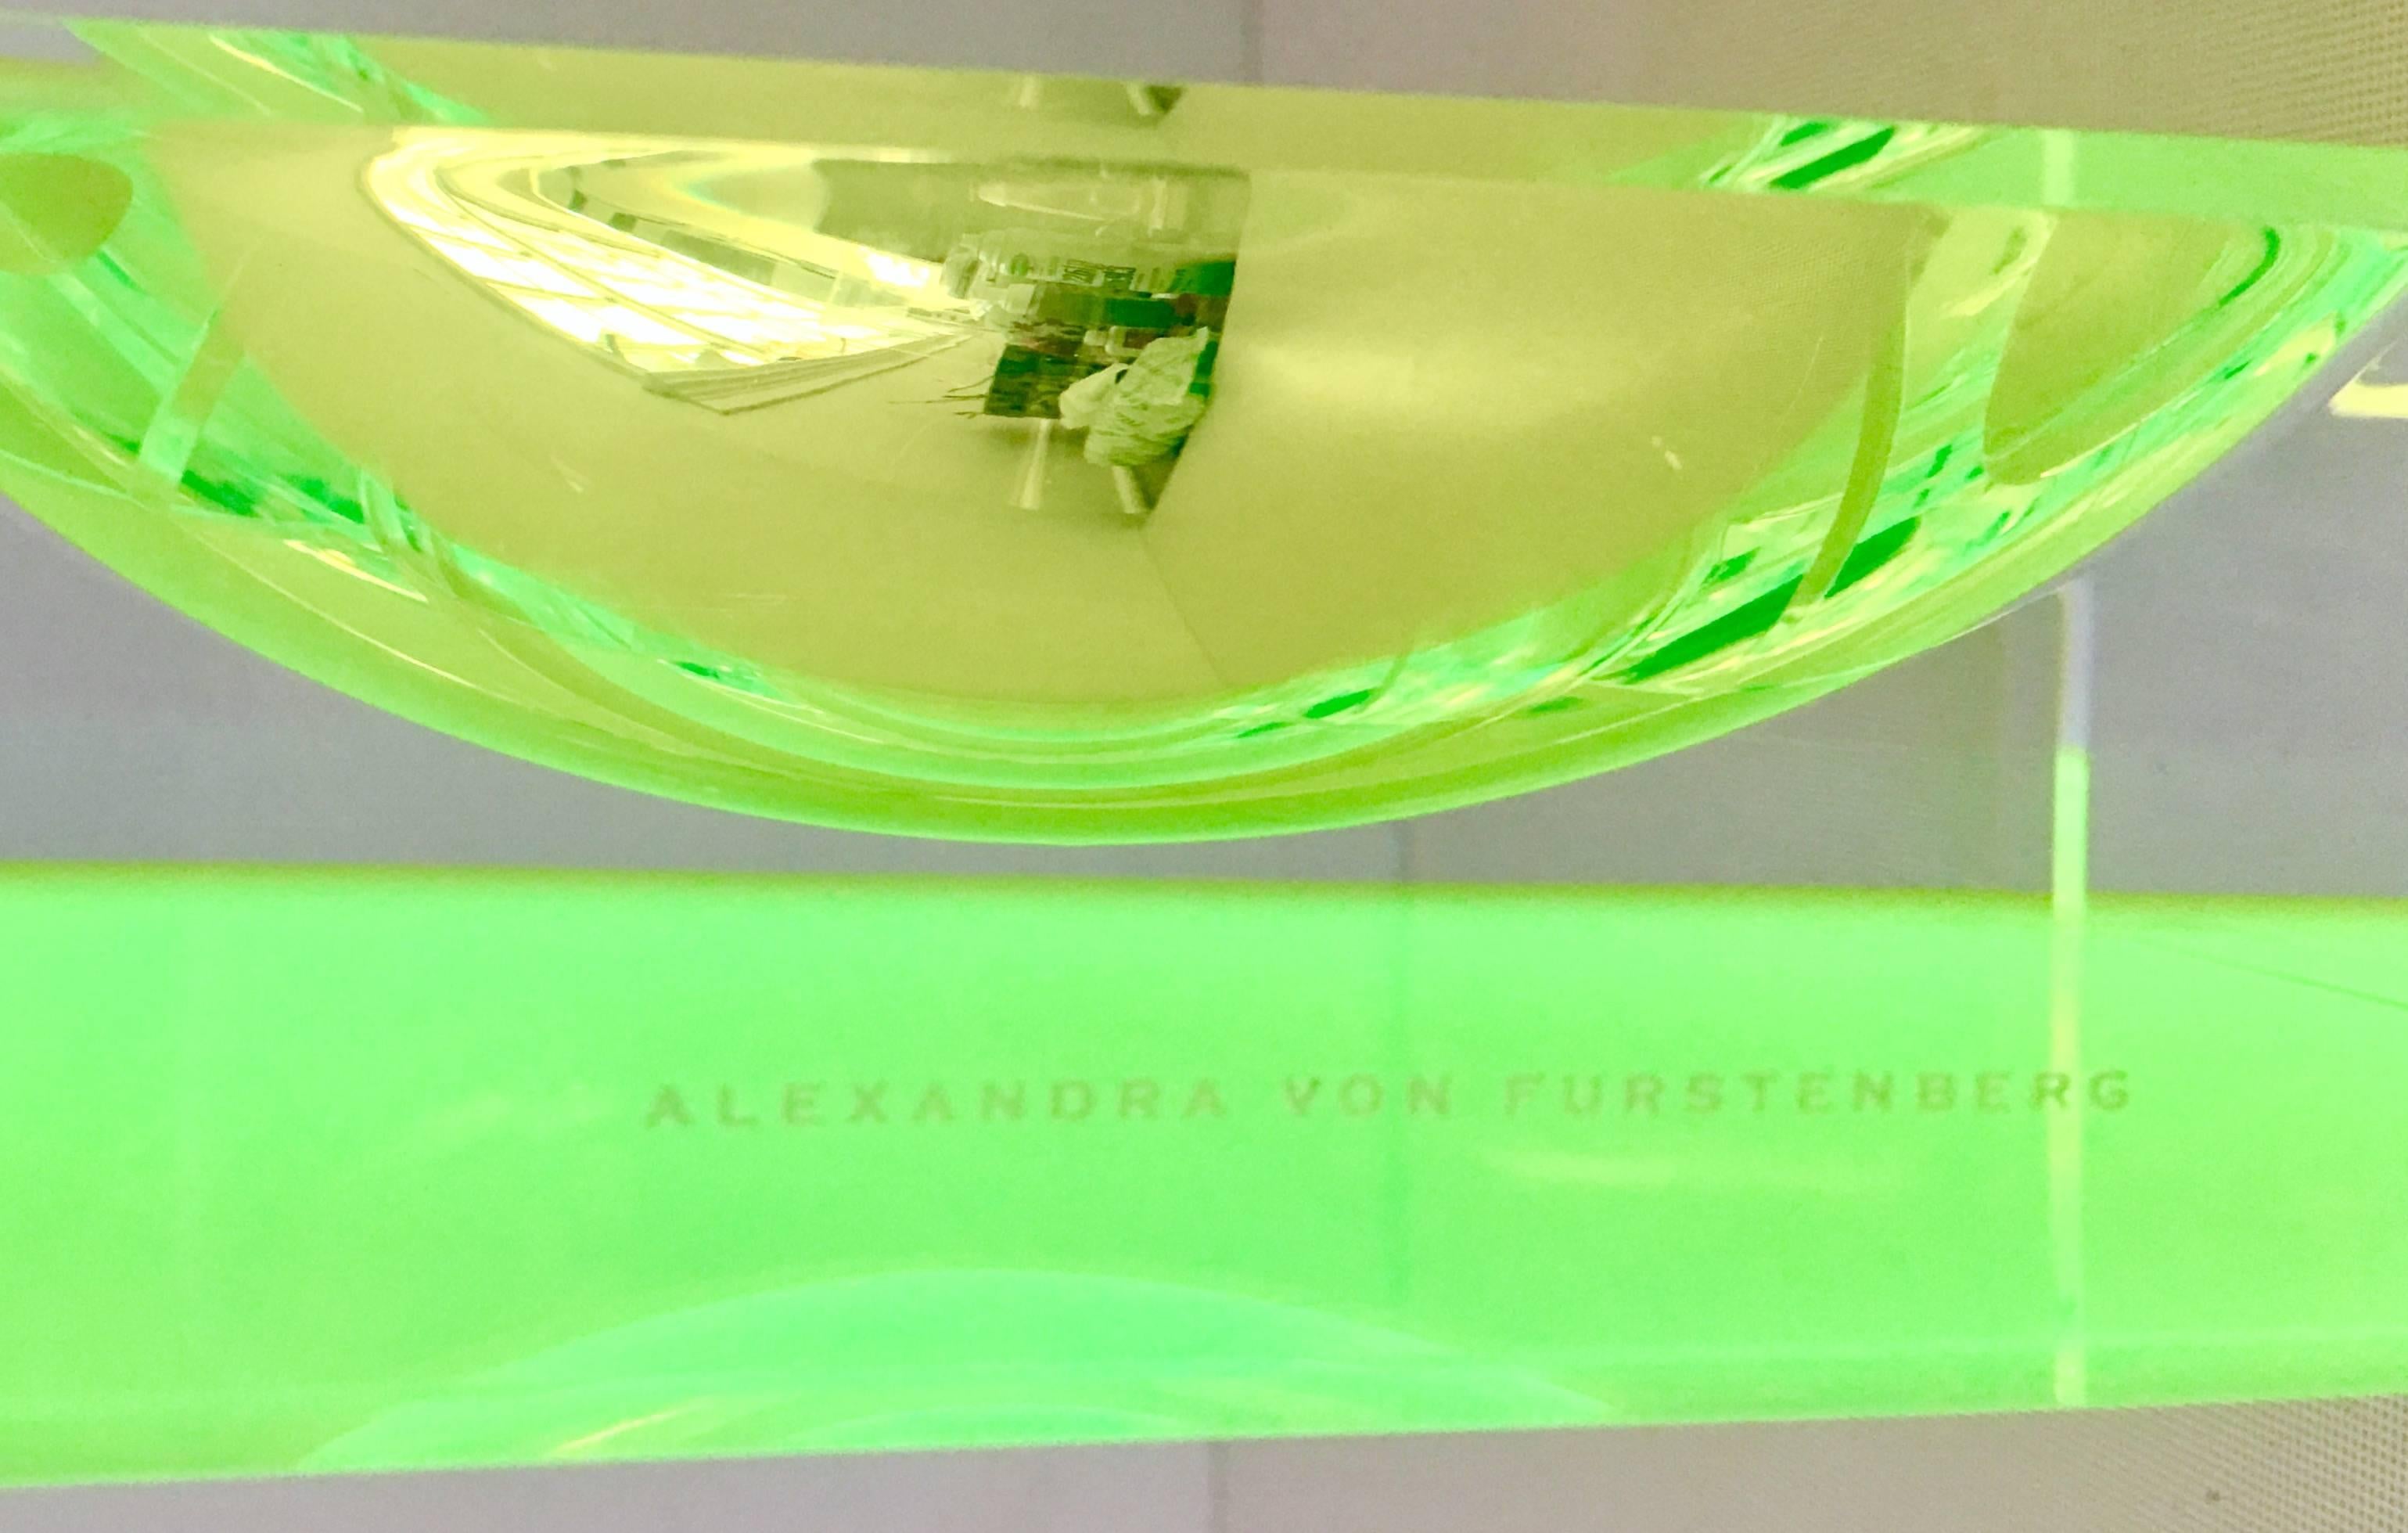 Modern Lucite Carved Optic Square & Round  Bowl by Alexendra Von Furstenberg For Sale 1